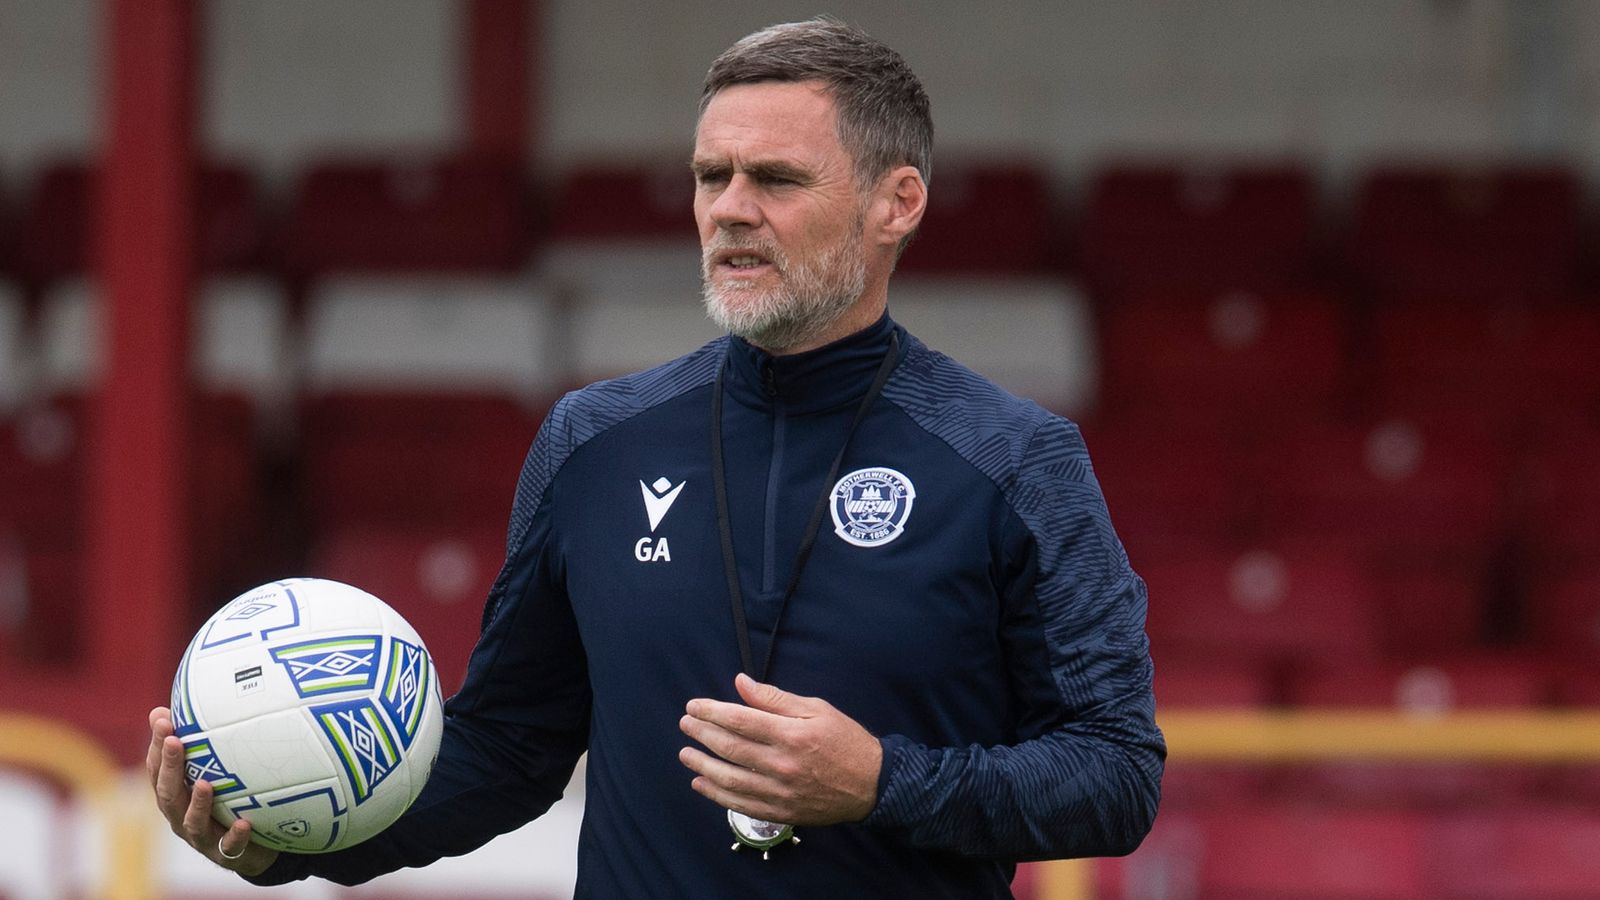 Motherwell's new manager search: Graham Alexander reflects on his time at club and challenges that await new boss | Football News | Sky Sports